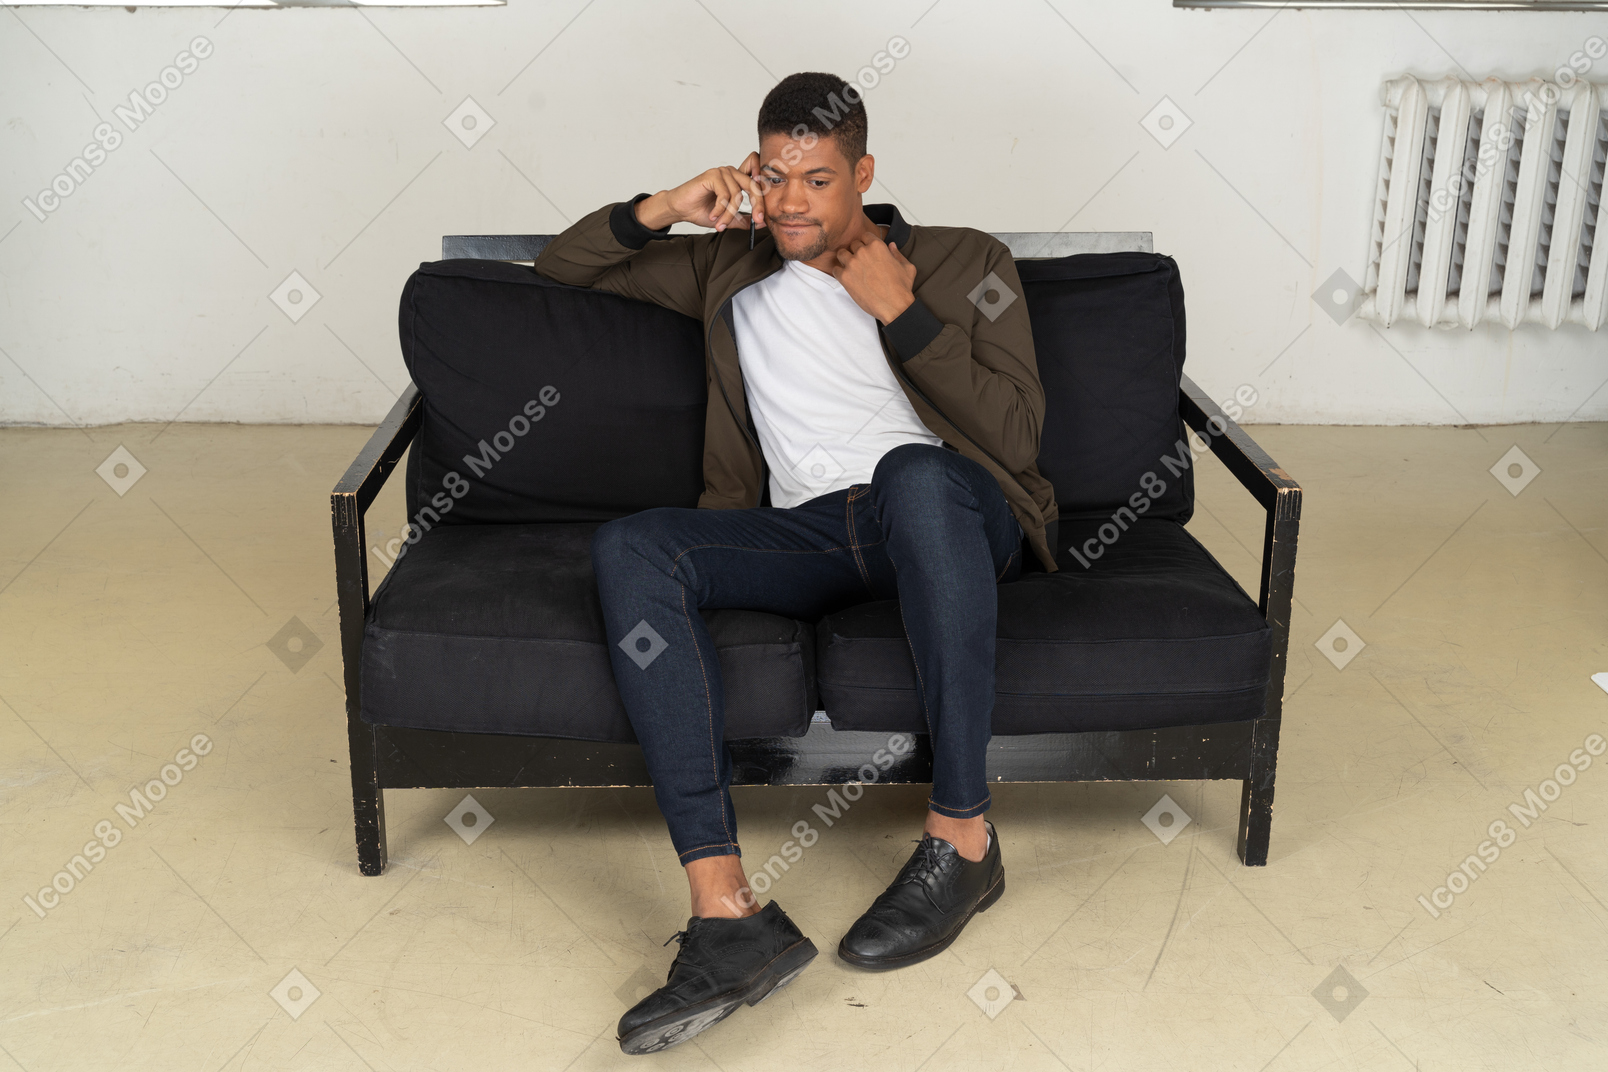 Front view of a perplexed young man sitting on a sofa